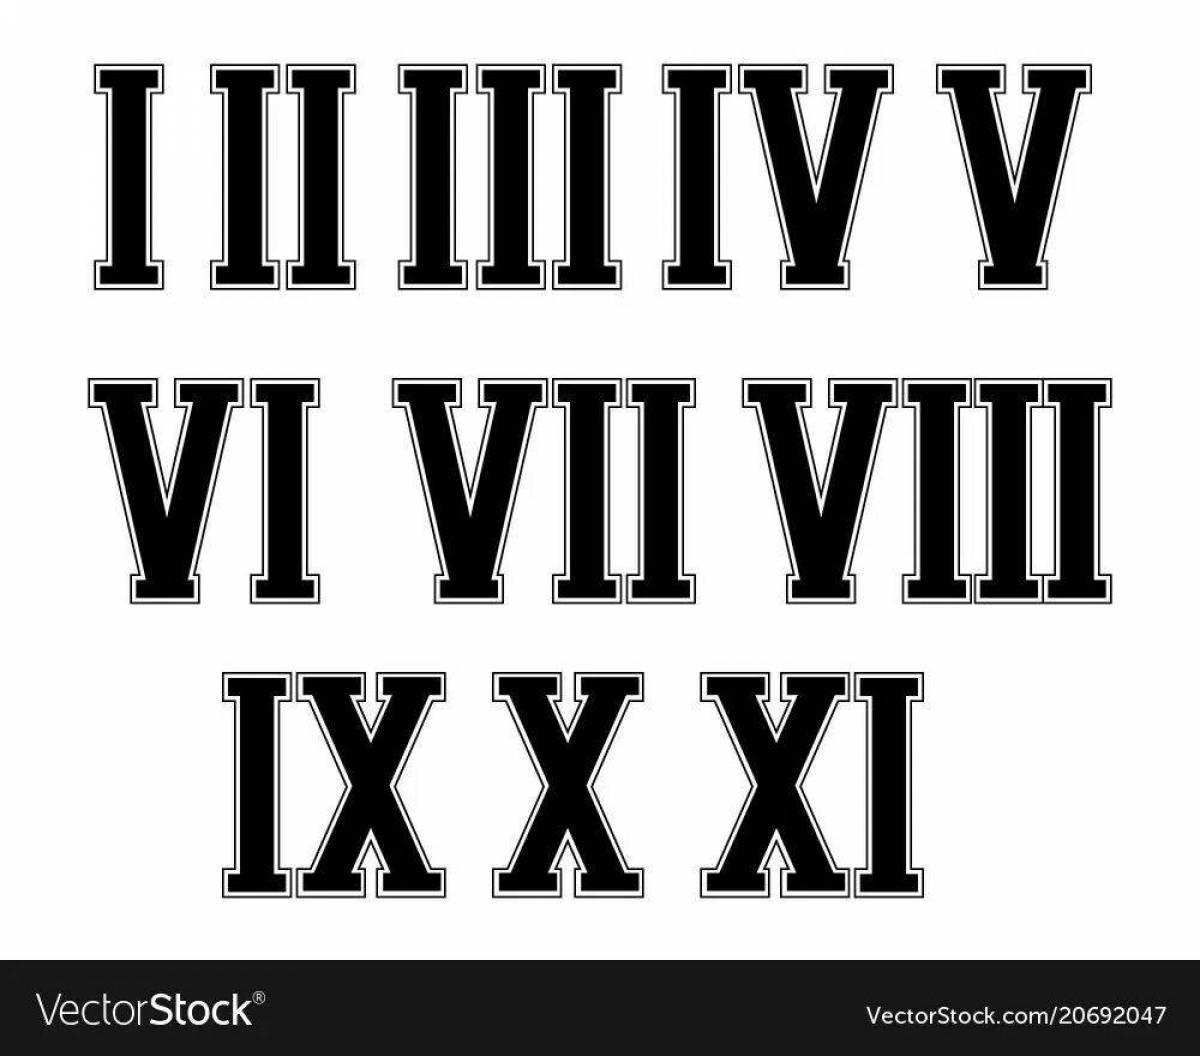 Colorful coloring of Roman numerals